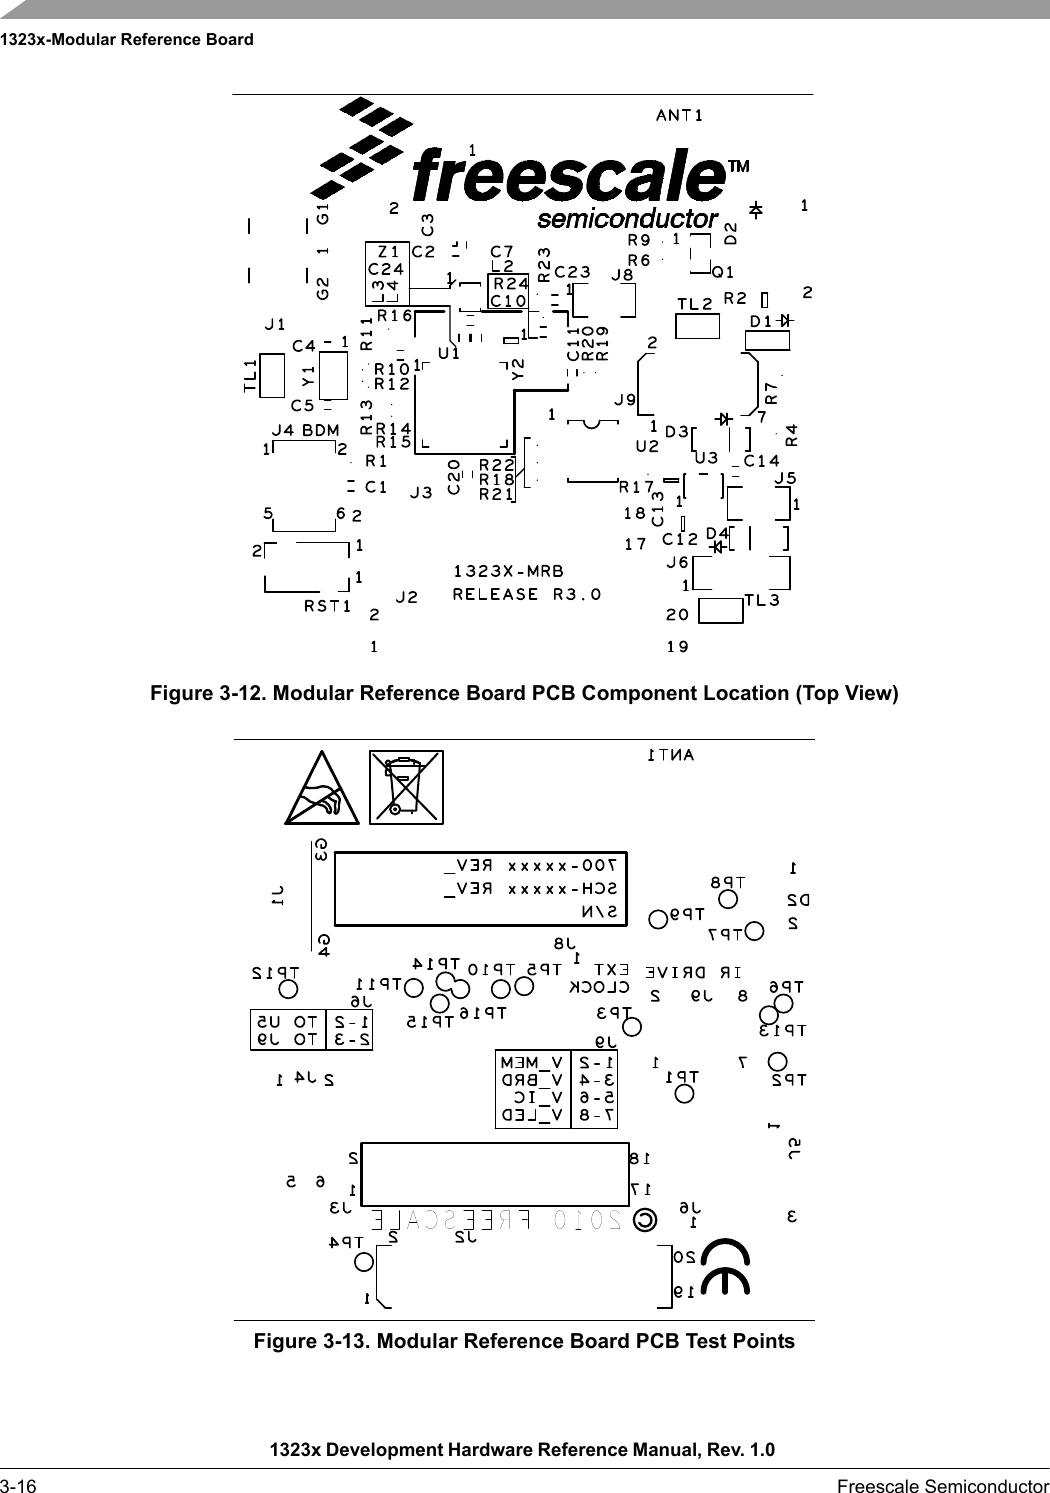 1323x-Modular Reference Board1323x Development Hardware Reference Manual, Rev. 1.0 3-16 Freescale SemiconductorFigure 3-12. Modular Reference Board PCB Component Location (Top View)Figure 3-13. Modular Reference Board PCB Test Points